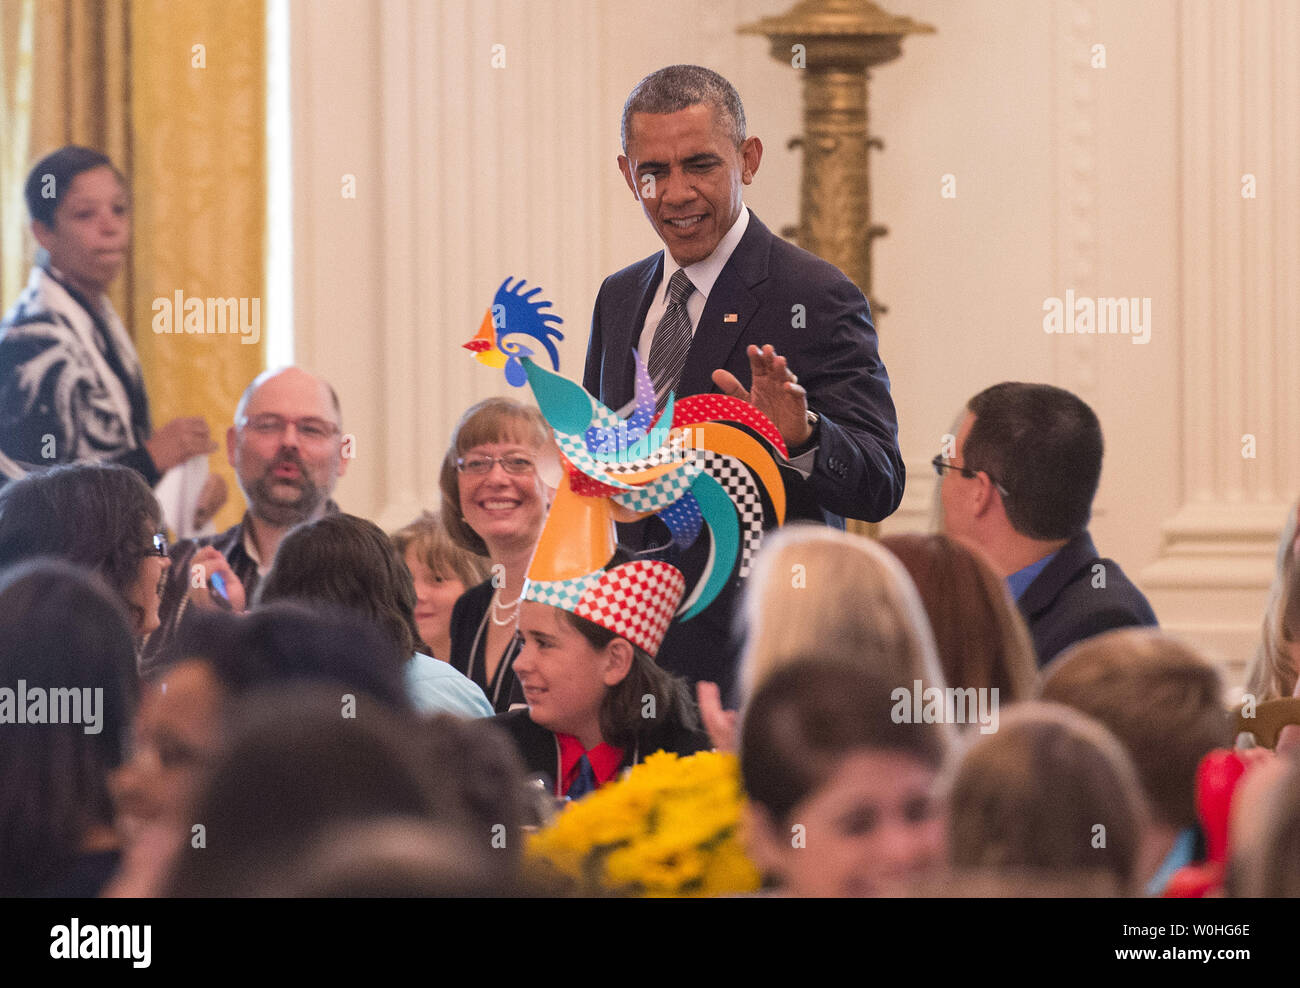 President Barack Obama looks at a child's hat as he arrives at the Kids' State Dinner in the East Room at the White House on July 18, 2014 in Washington, D.C. UPI/Kevin Dietsch Stock Photo